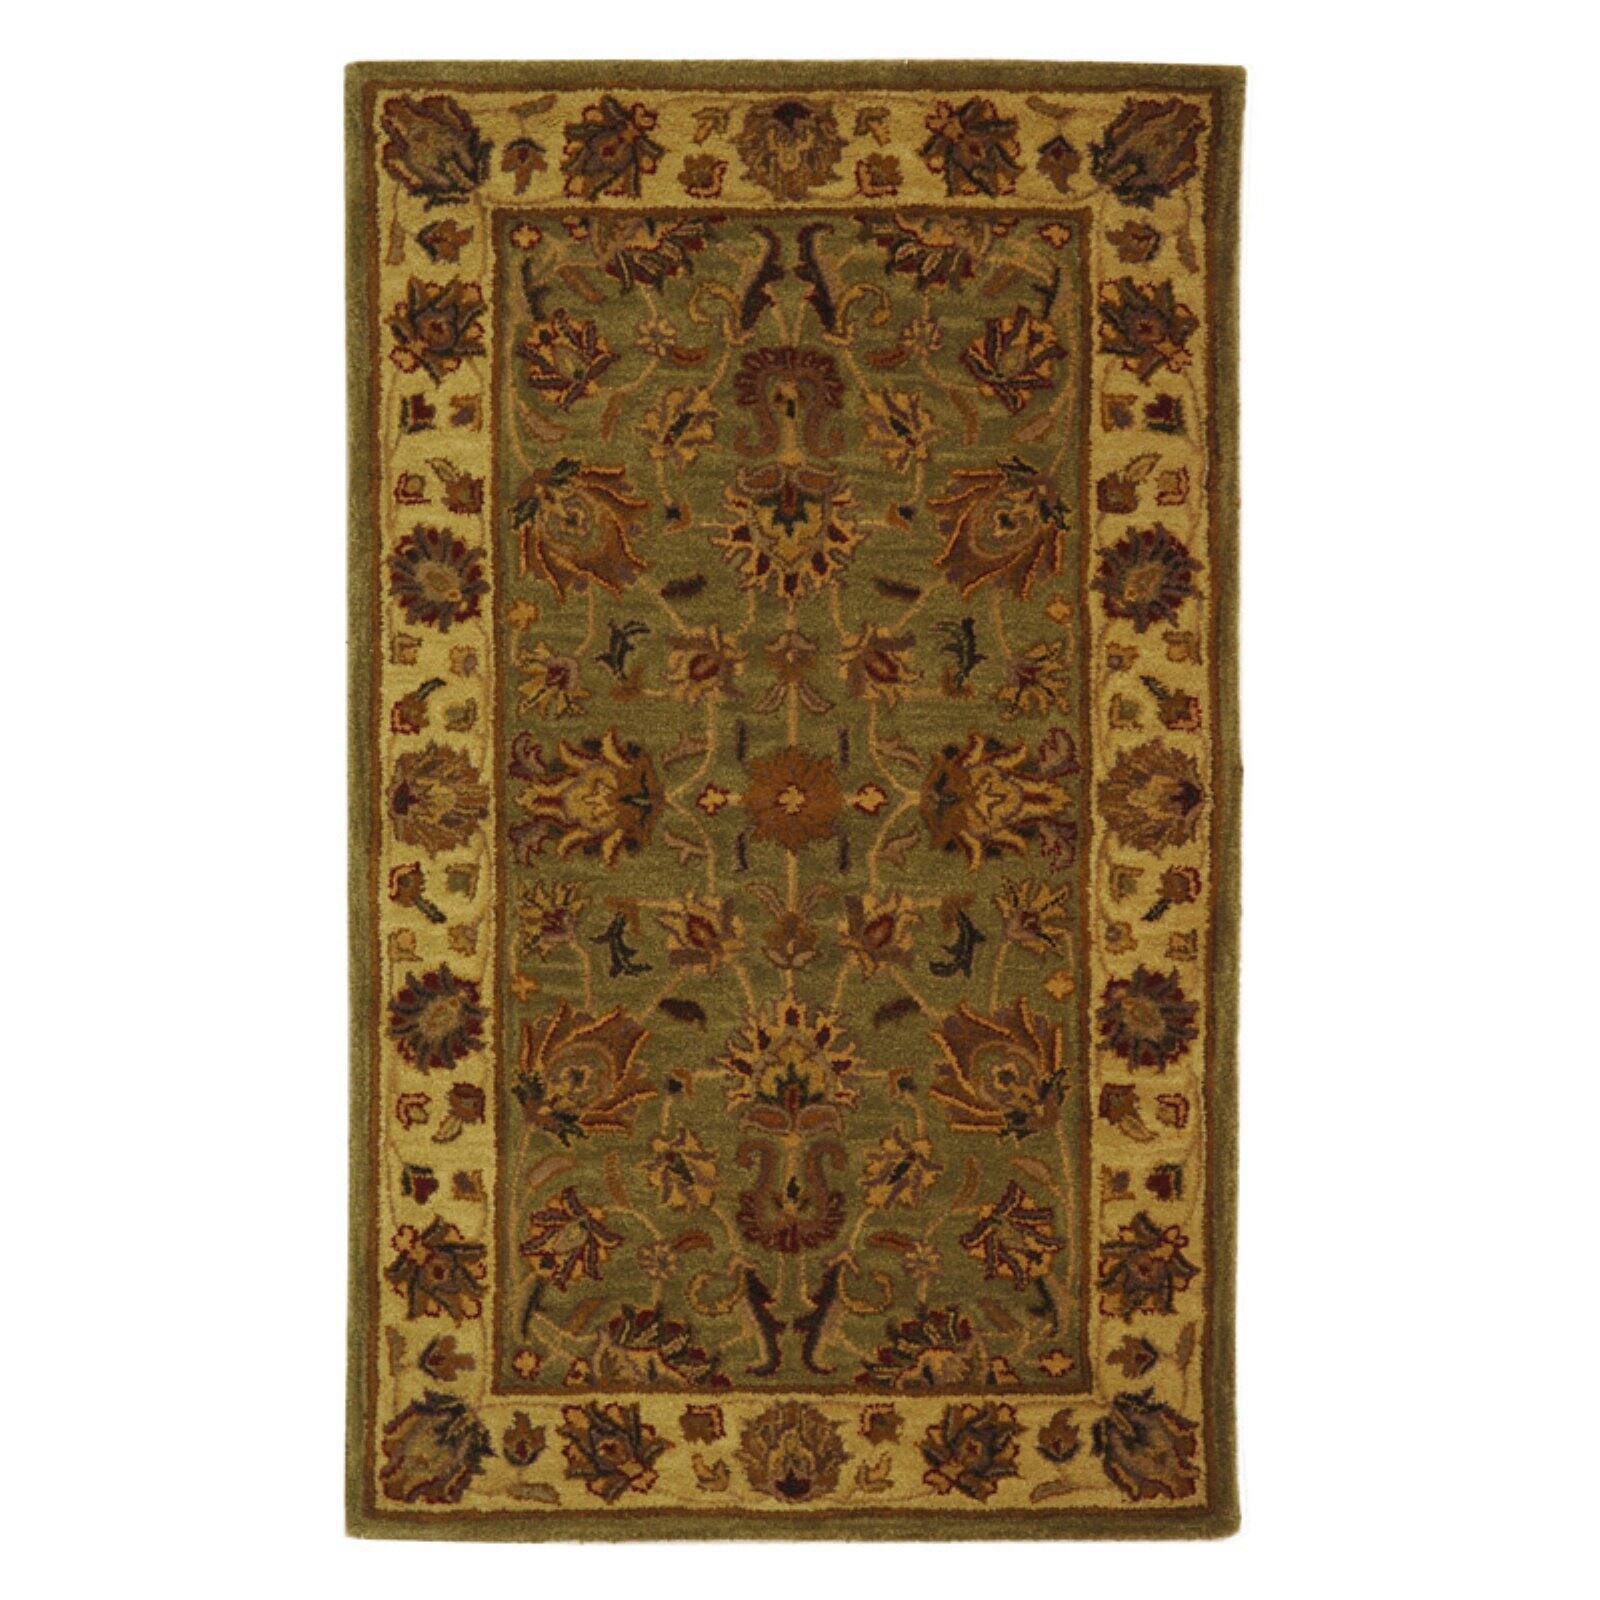 SAFAVIEH Heritage Regis Traditional Wool Area Rug, Green/Gold, 4'6" x 6'6" Oval - image 4 of 10